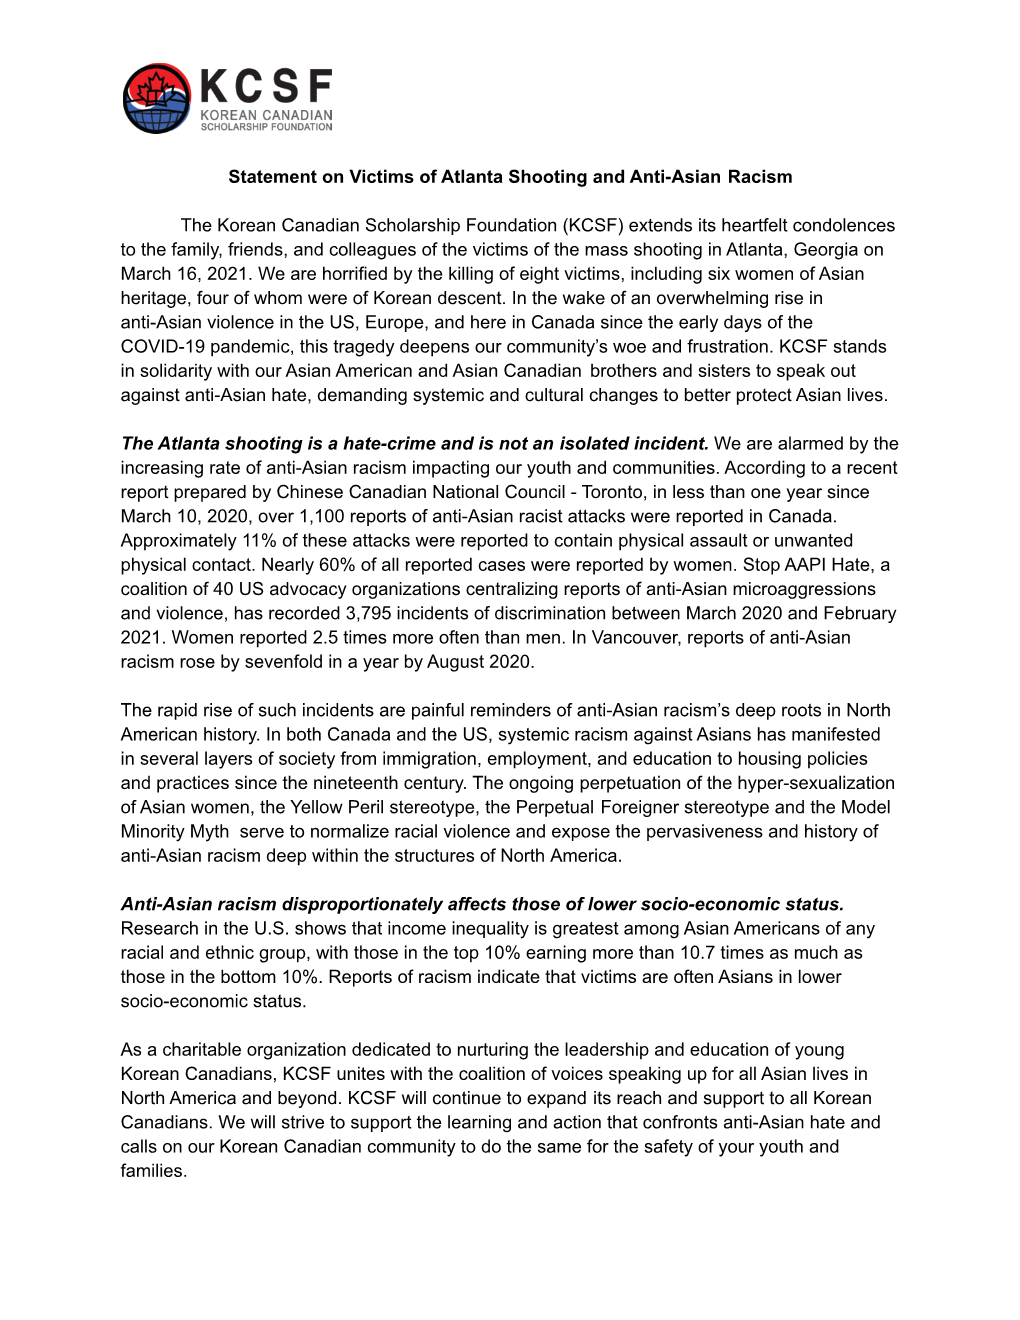 KCSF Statement on Victims of Atlanta Shooting and Anti-Asian Racism